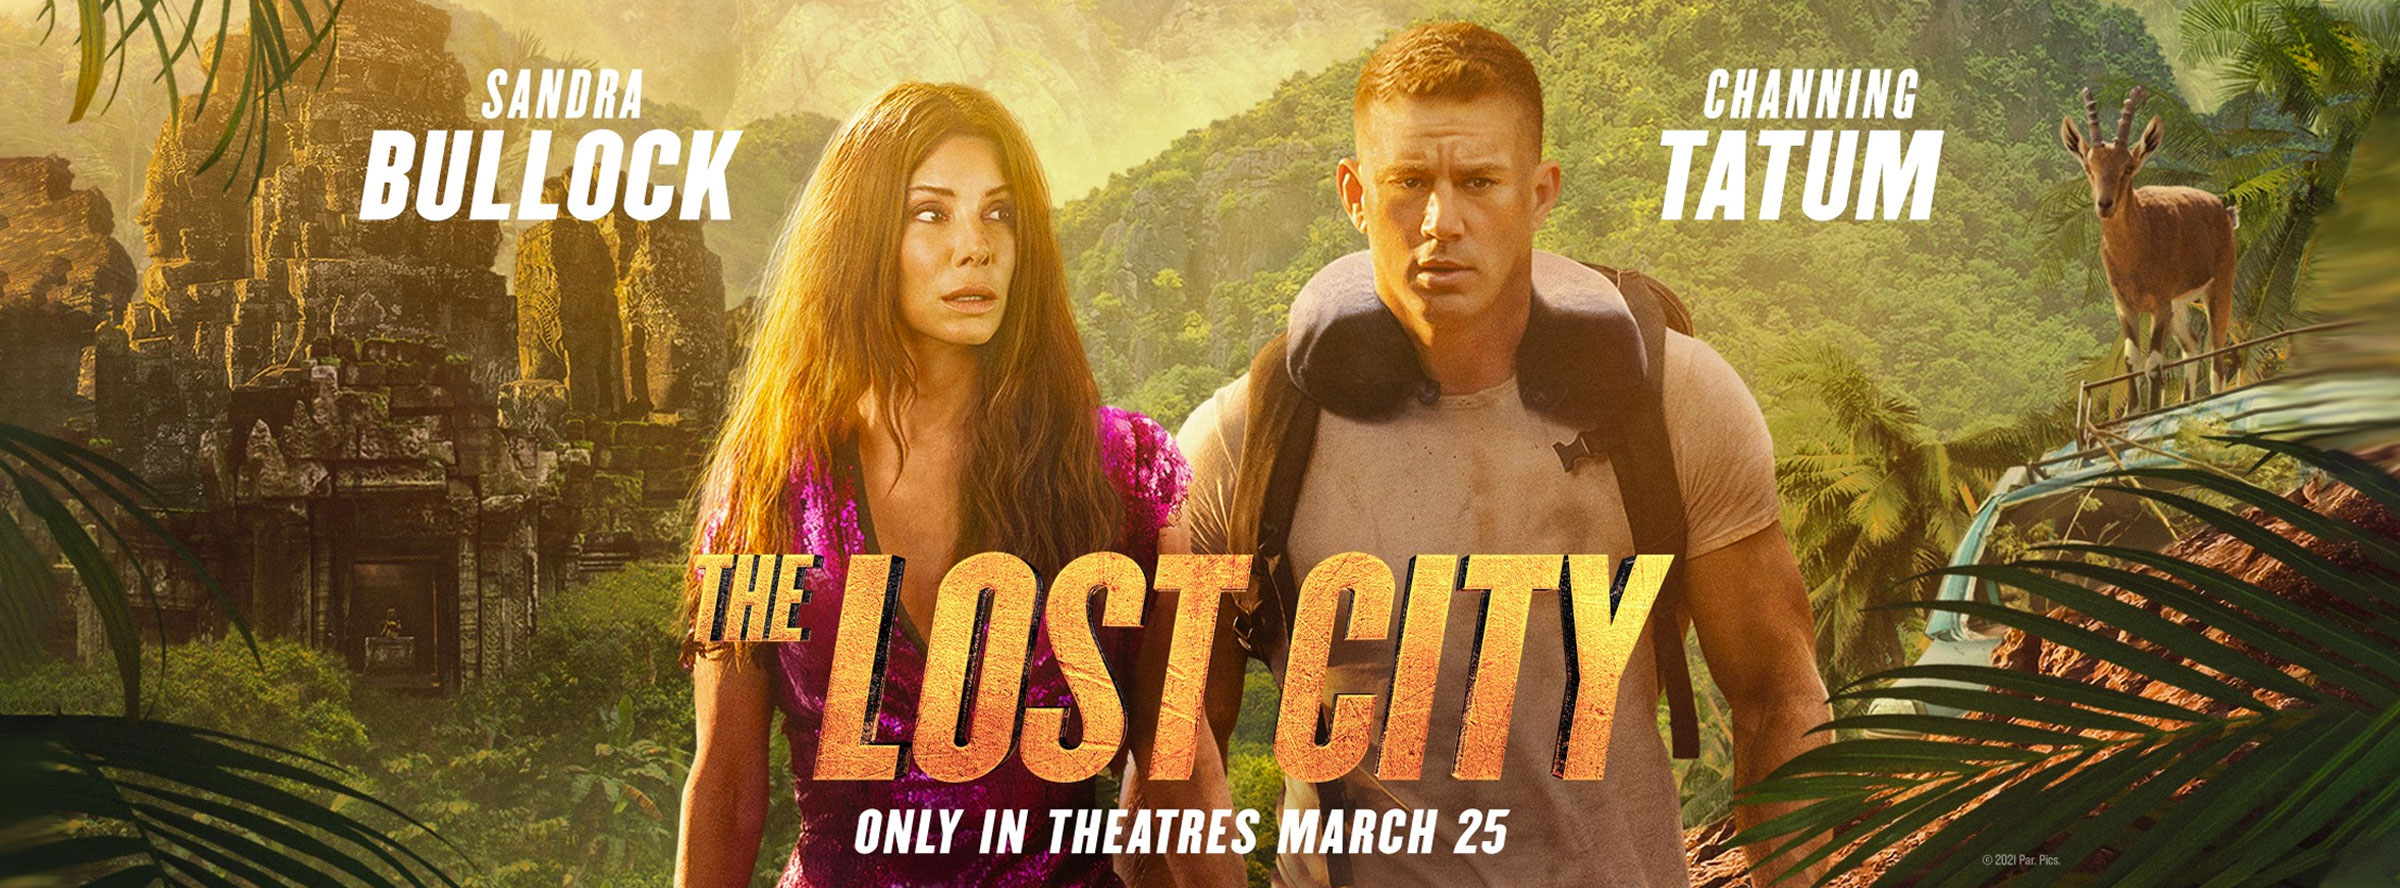 Slider Image for The Lost City